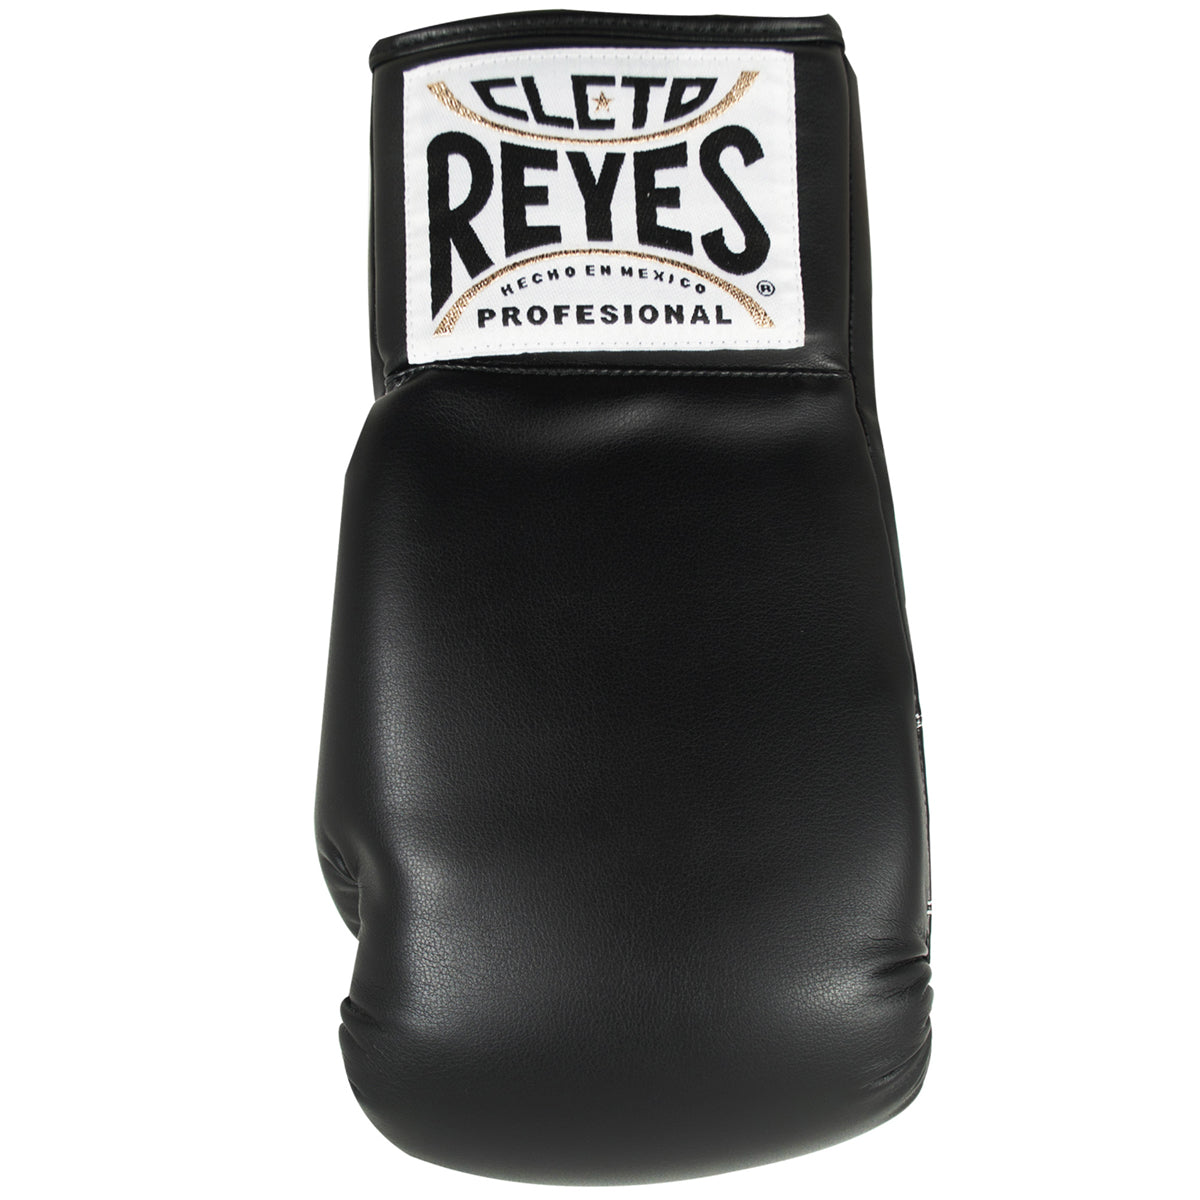 Cleto Reyes Standard Collectible Autograph Boxing Glove - White Cleto Reyes